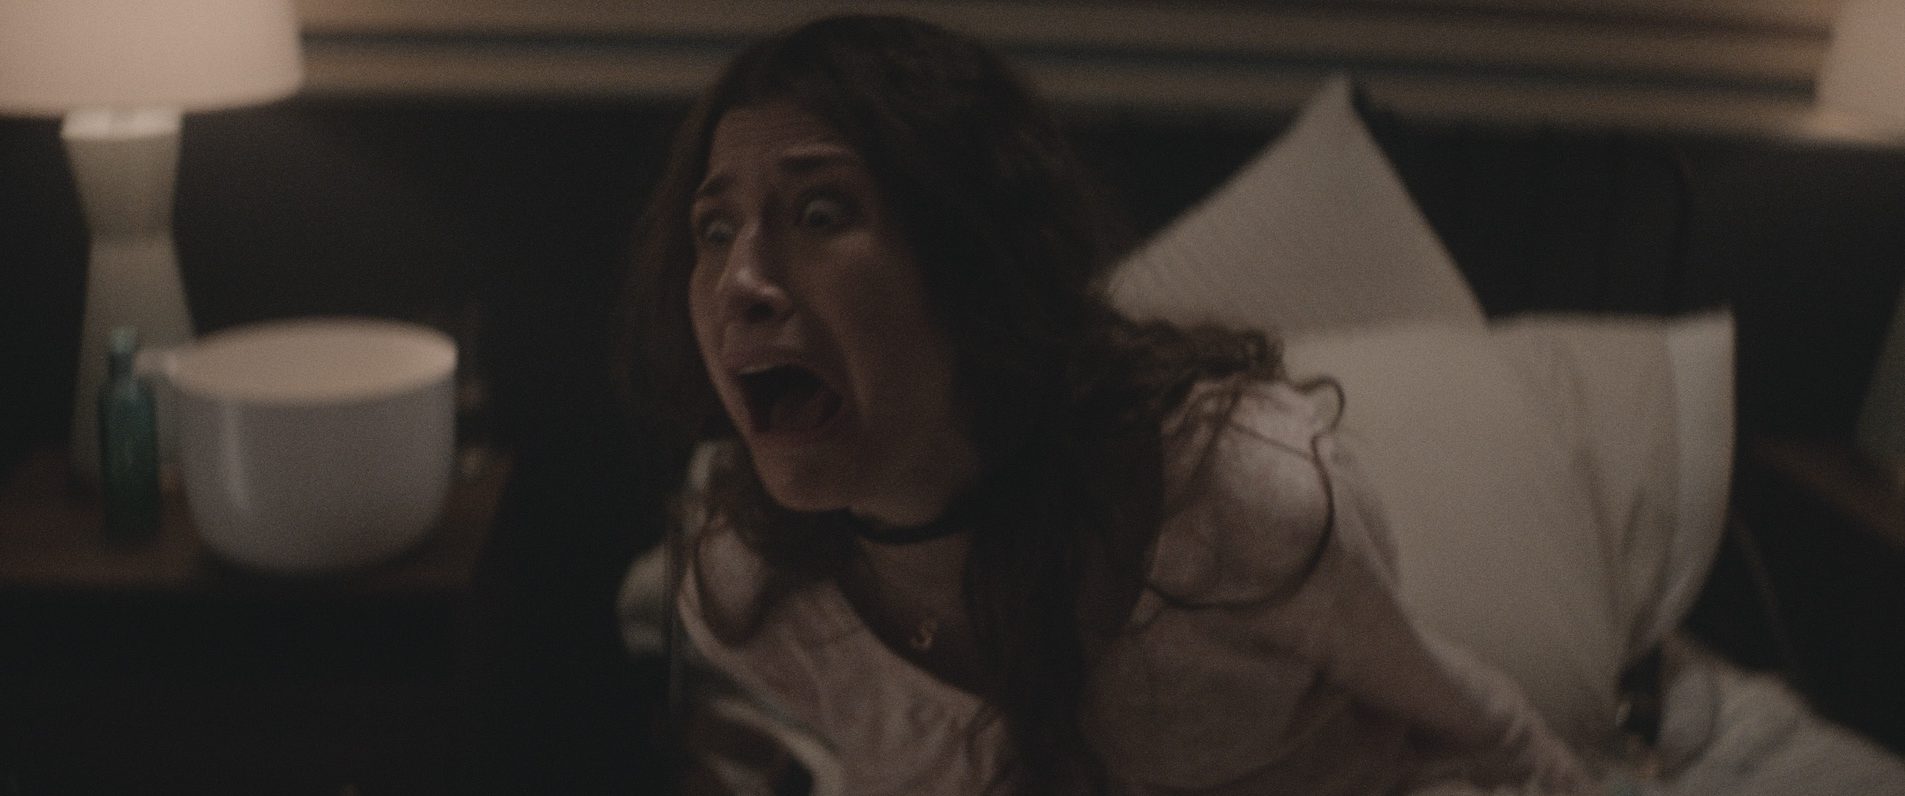 Captive pregnant woman [Konstantina Mantelos] screaming in horror at demons appearing in her room. Photo credit: Dyck, Justin. dir. Anything For Jackson. 2020.